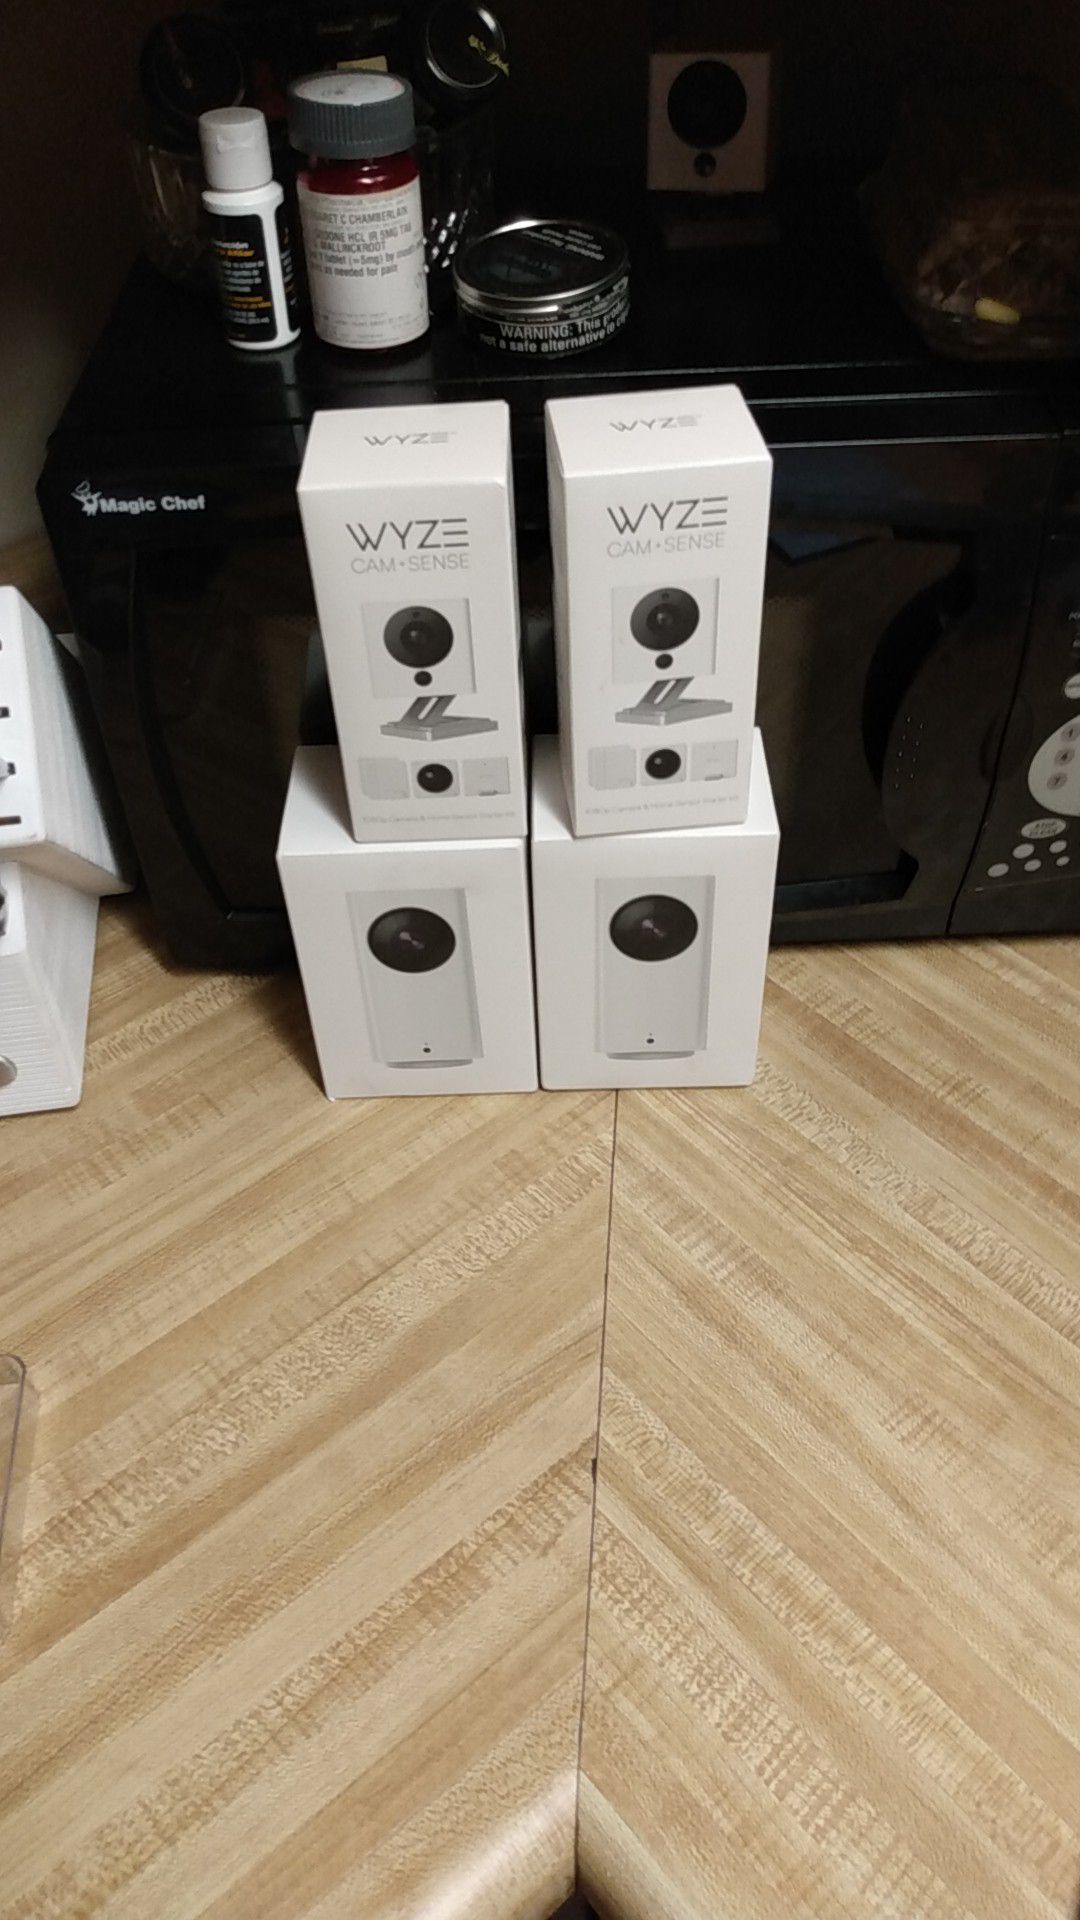 Wyze camera's. One of each